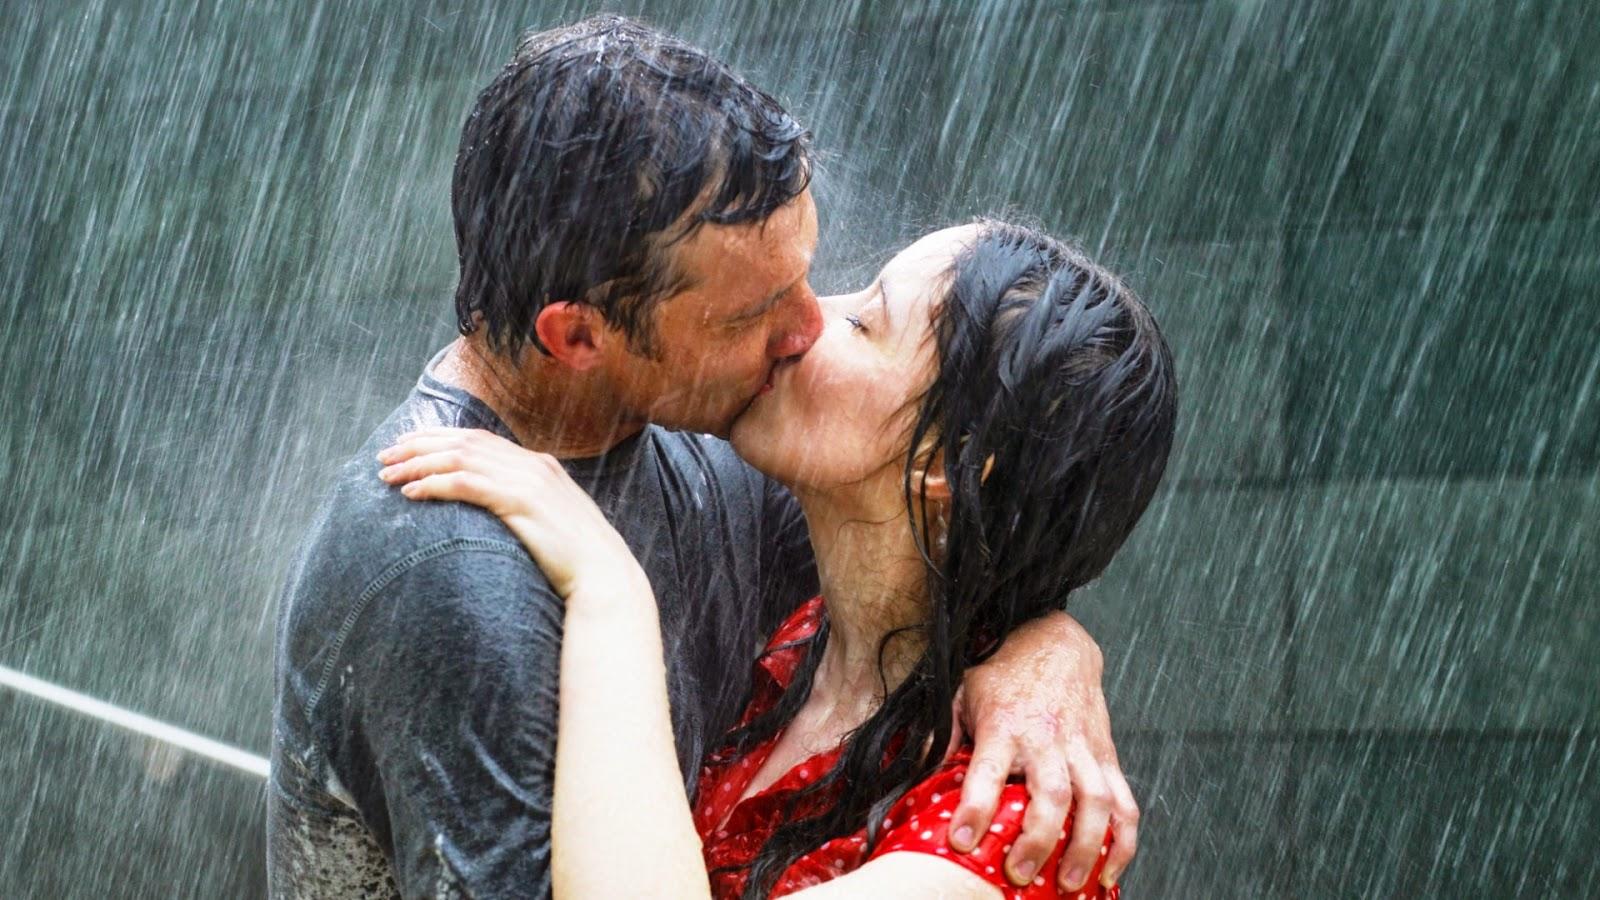 Passion in the Rain - Married sex stories - erotica